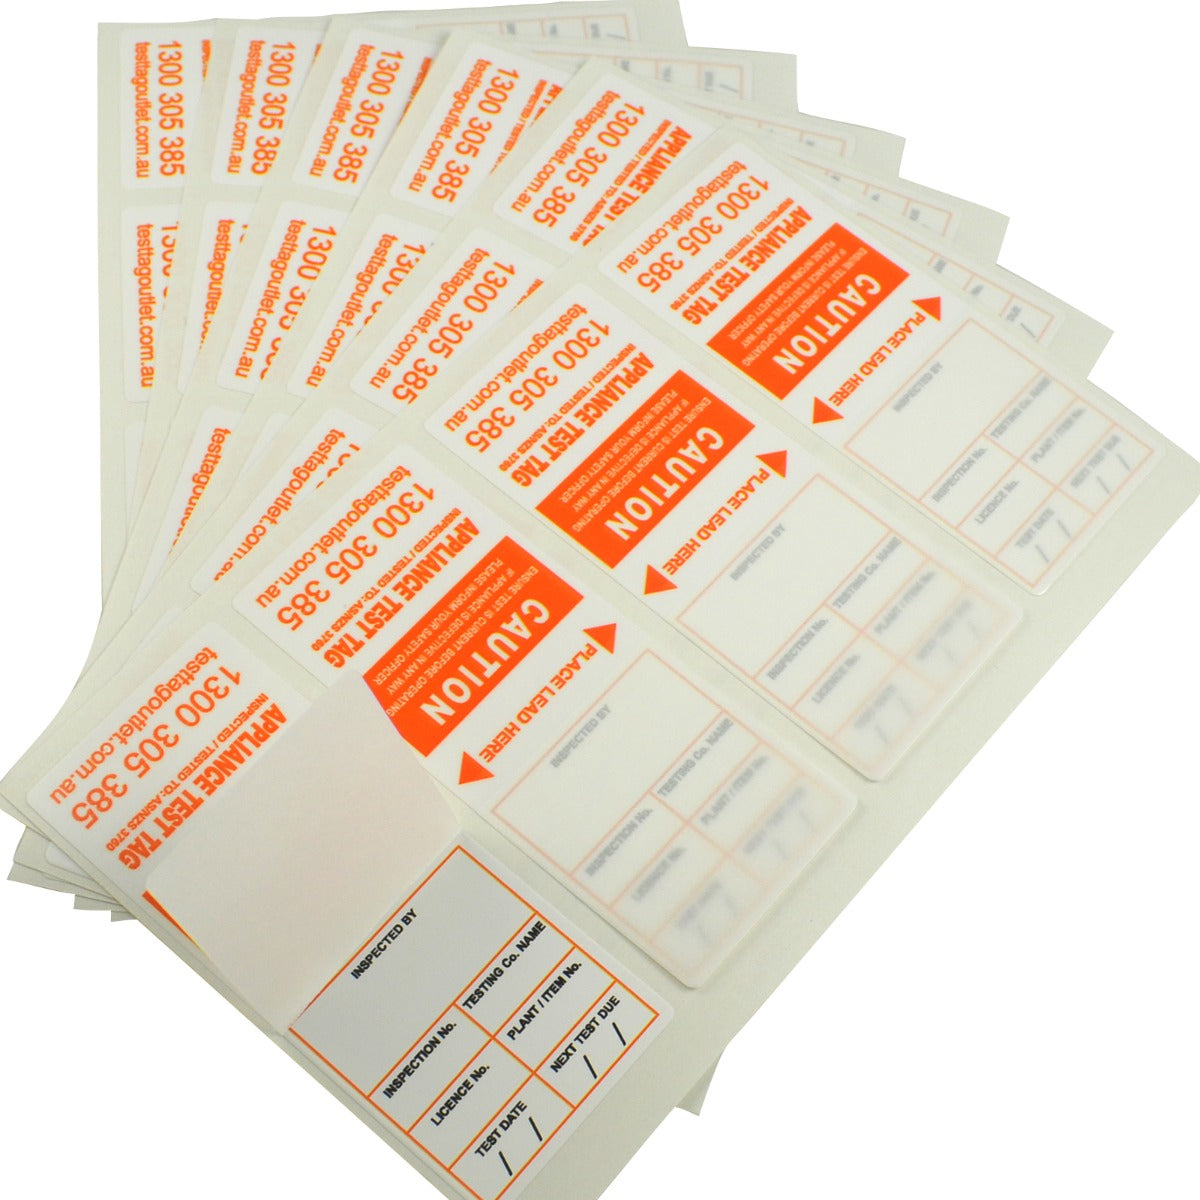 Heavy Duty Test Tags - Orange complies with AS/NZS 3760 standards